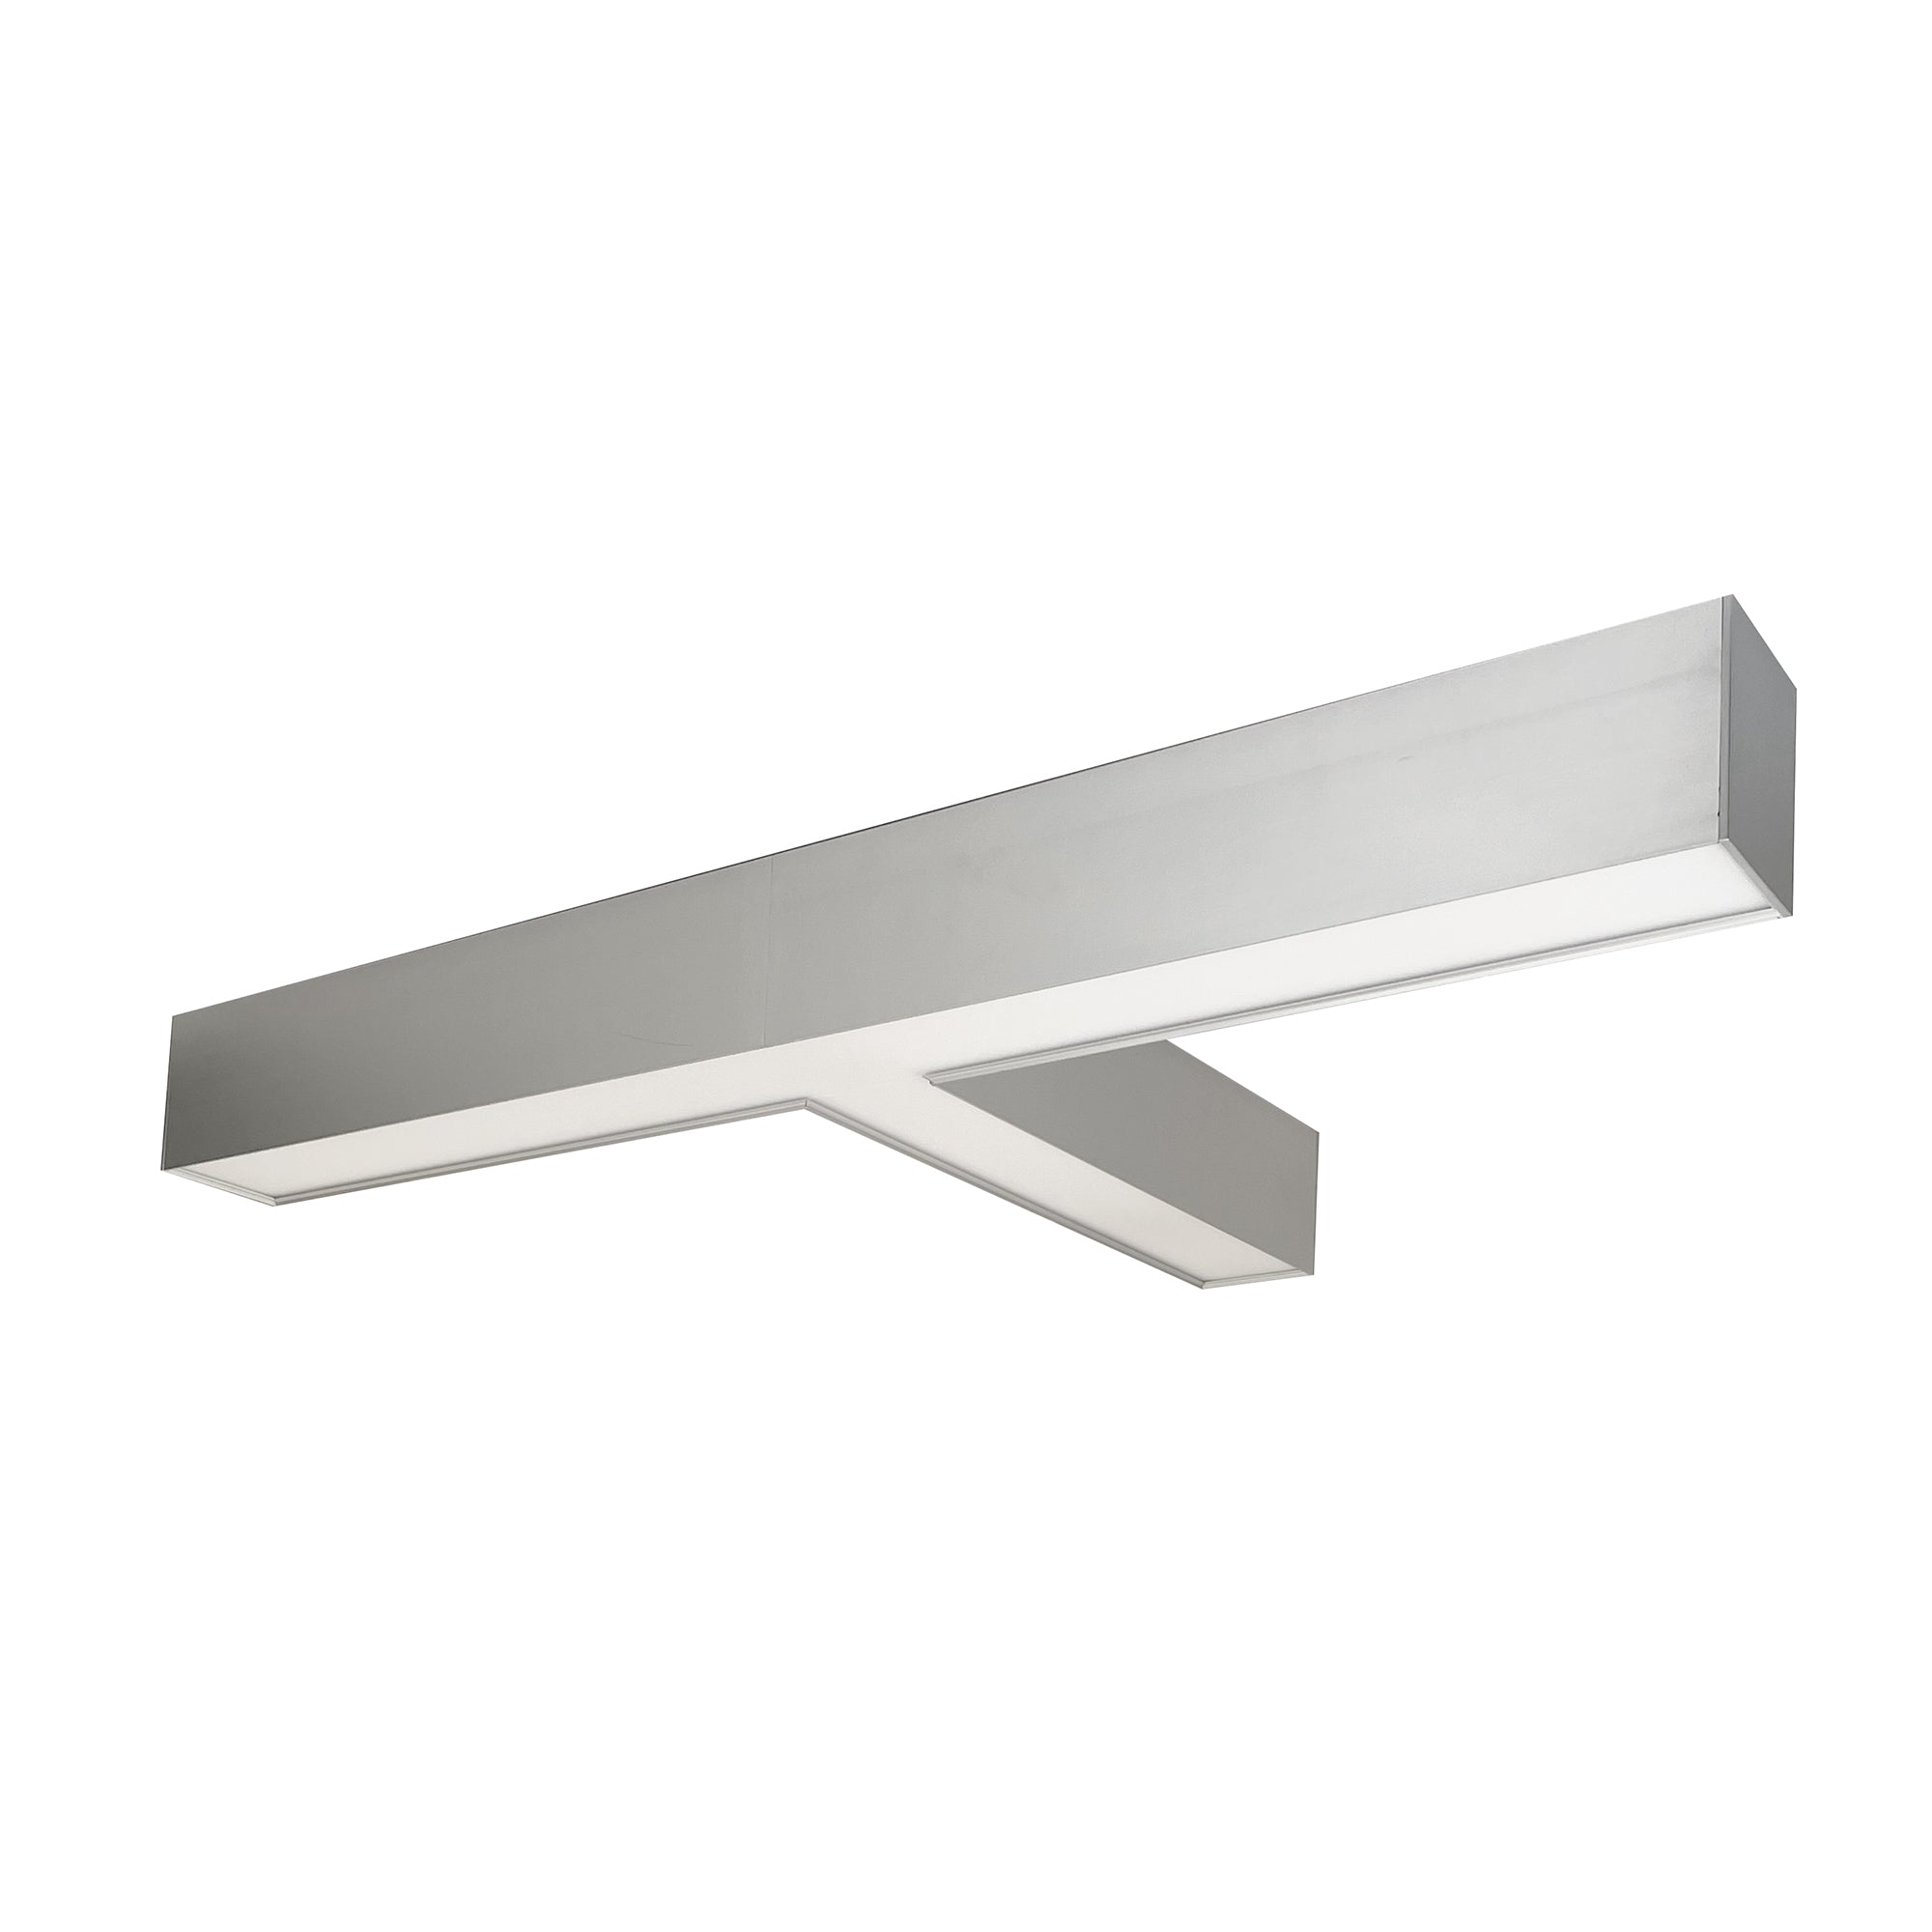 Nora Lighting NLUD-T334A - Linear -  InchT Inch Shaped L-Line LED Indirect/Direct Linear, 5027lm / Selectable CCT, Aluminum Finish